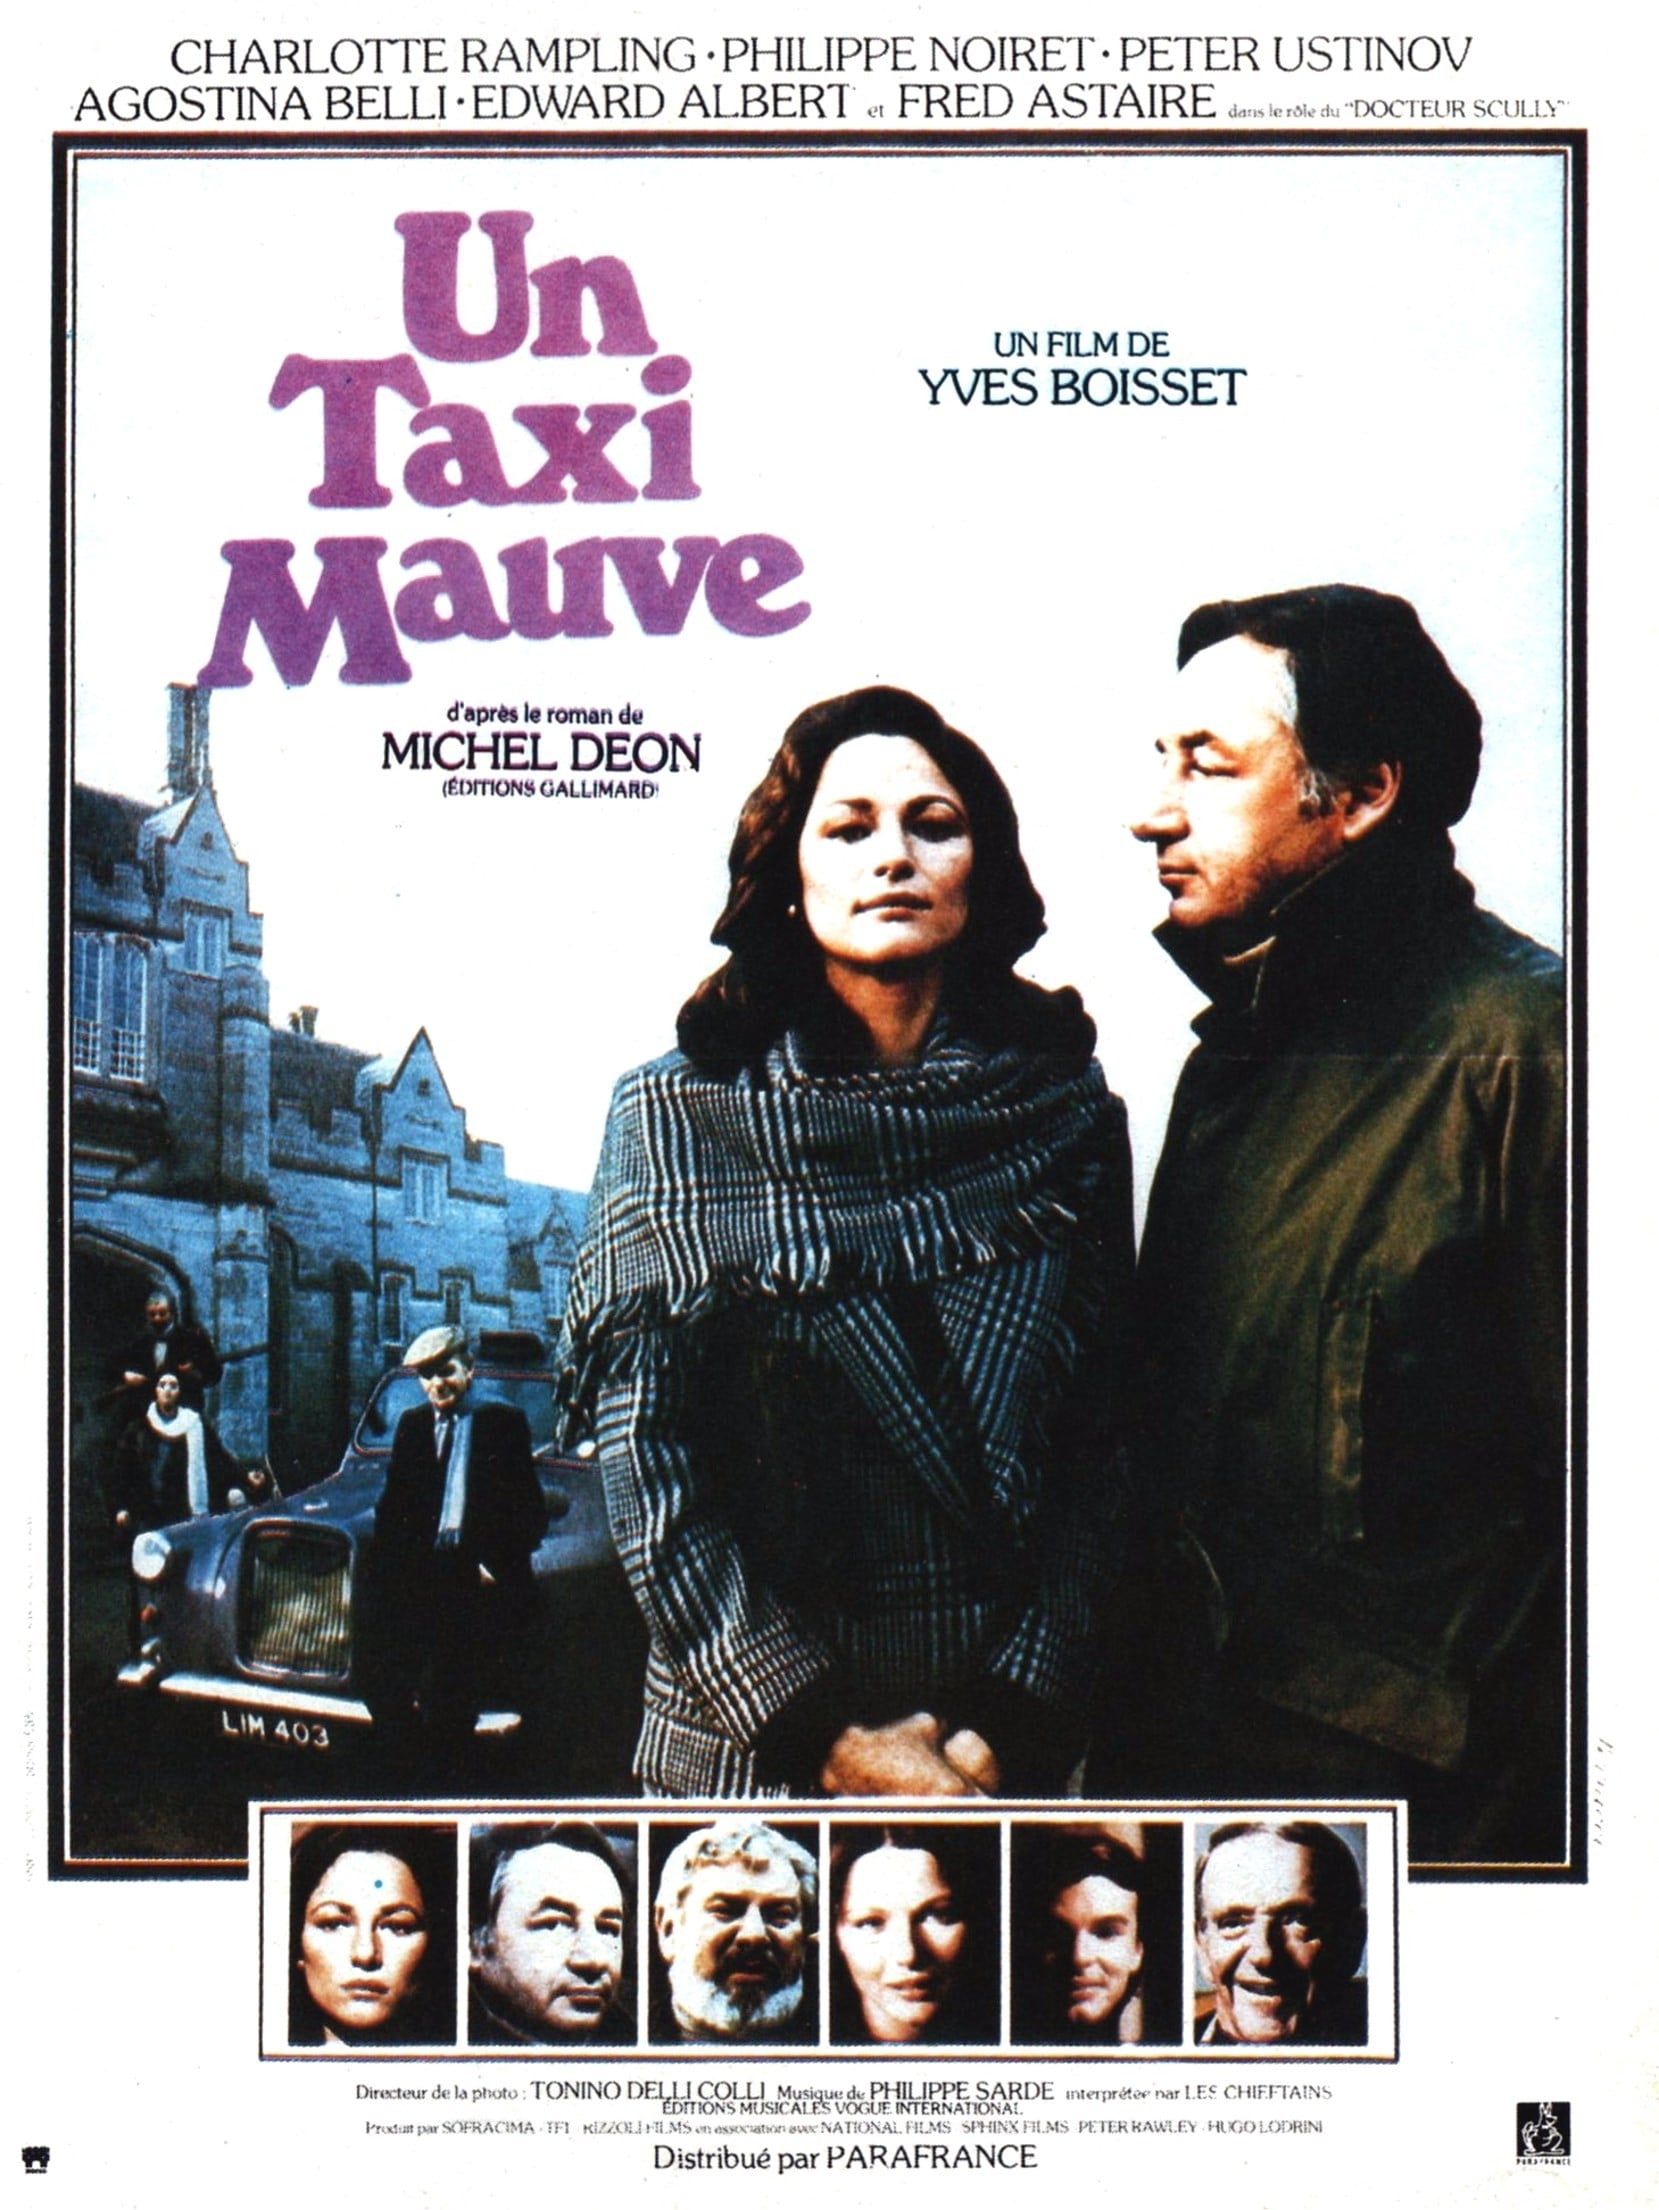 The Purple Taxi (1977)